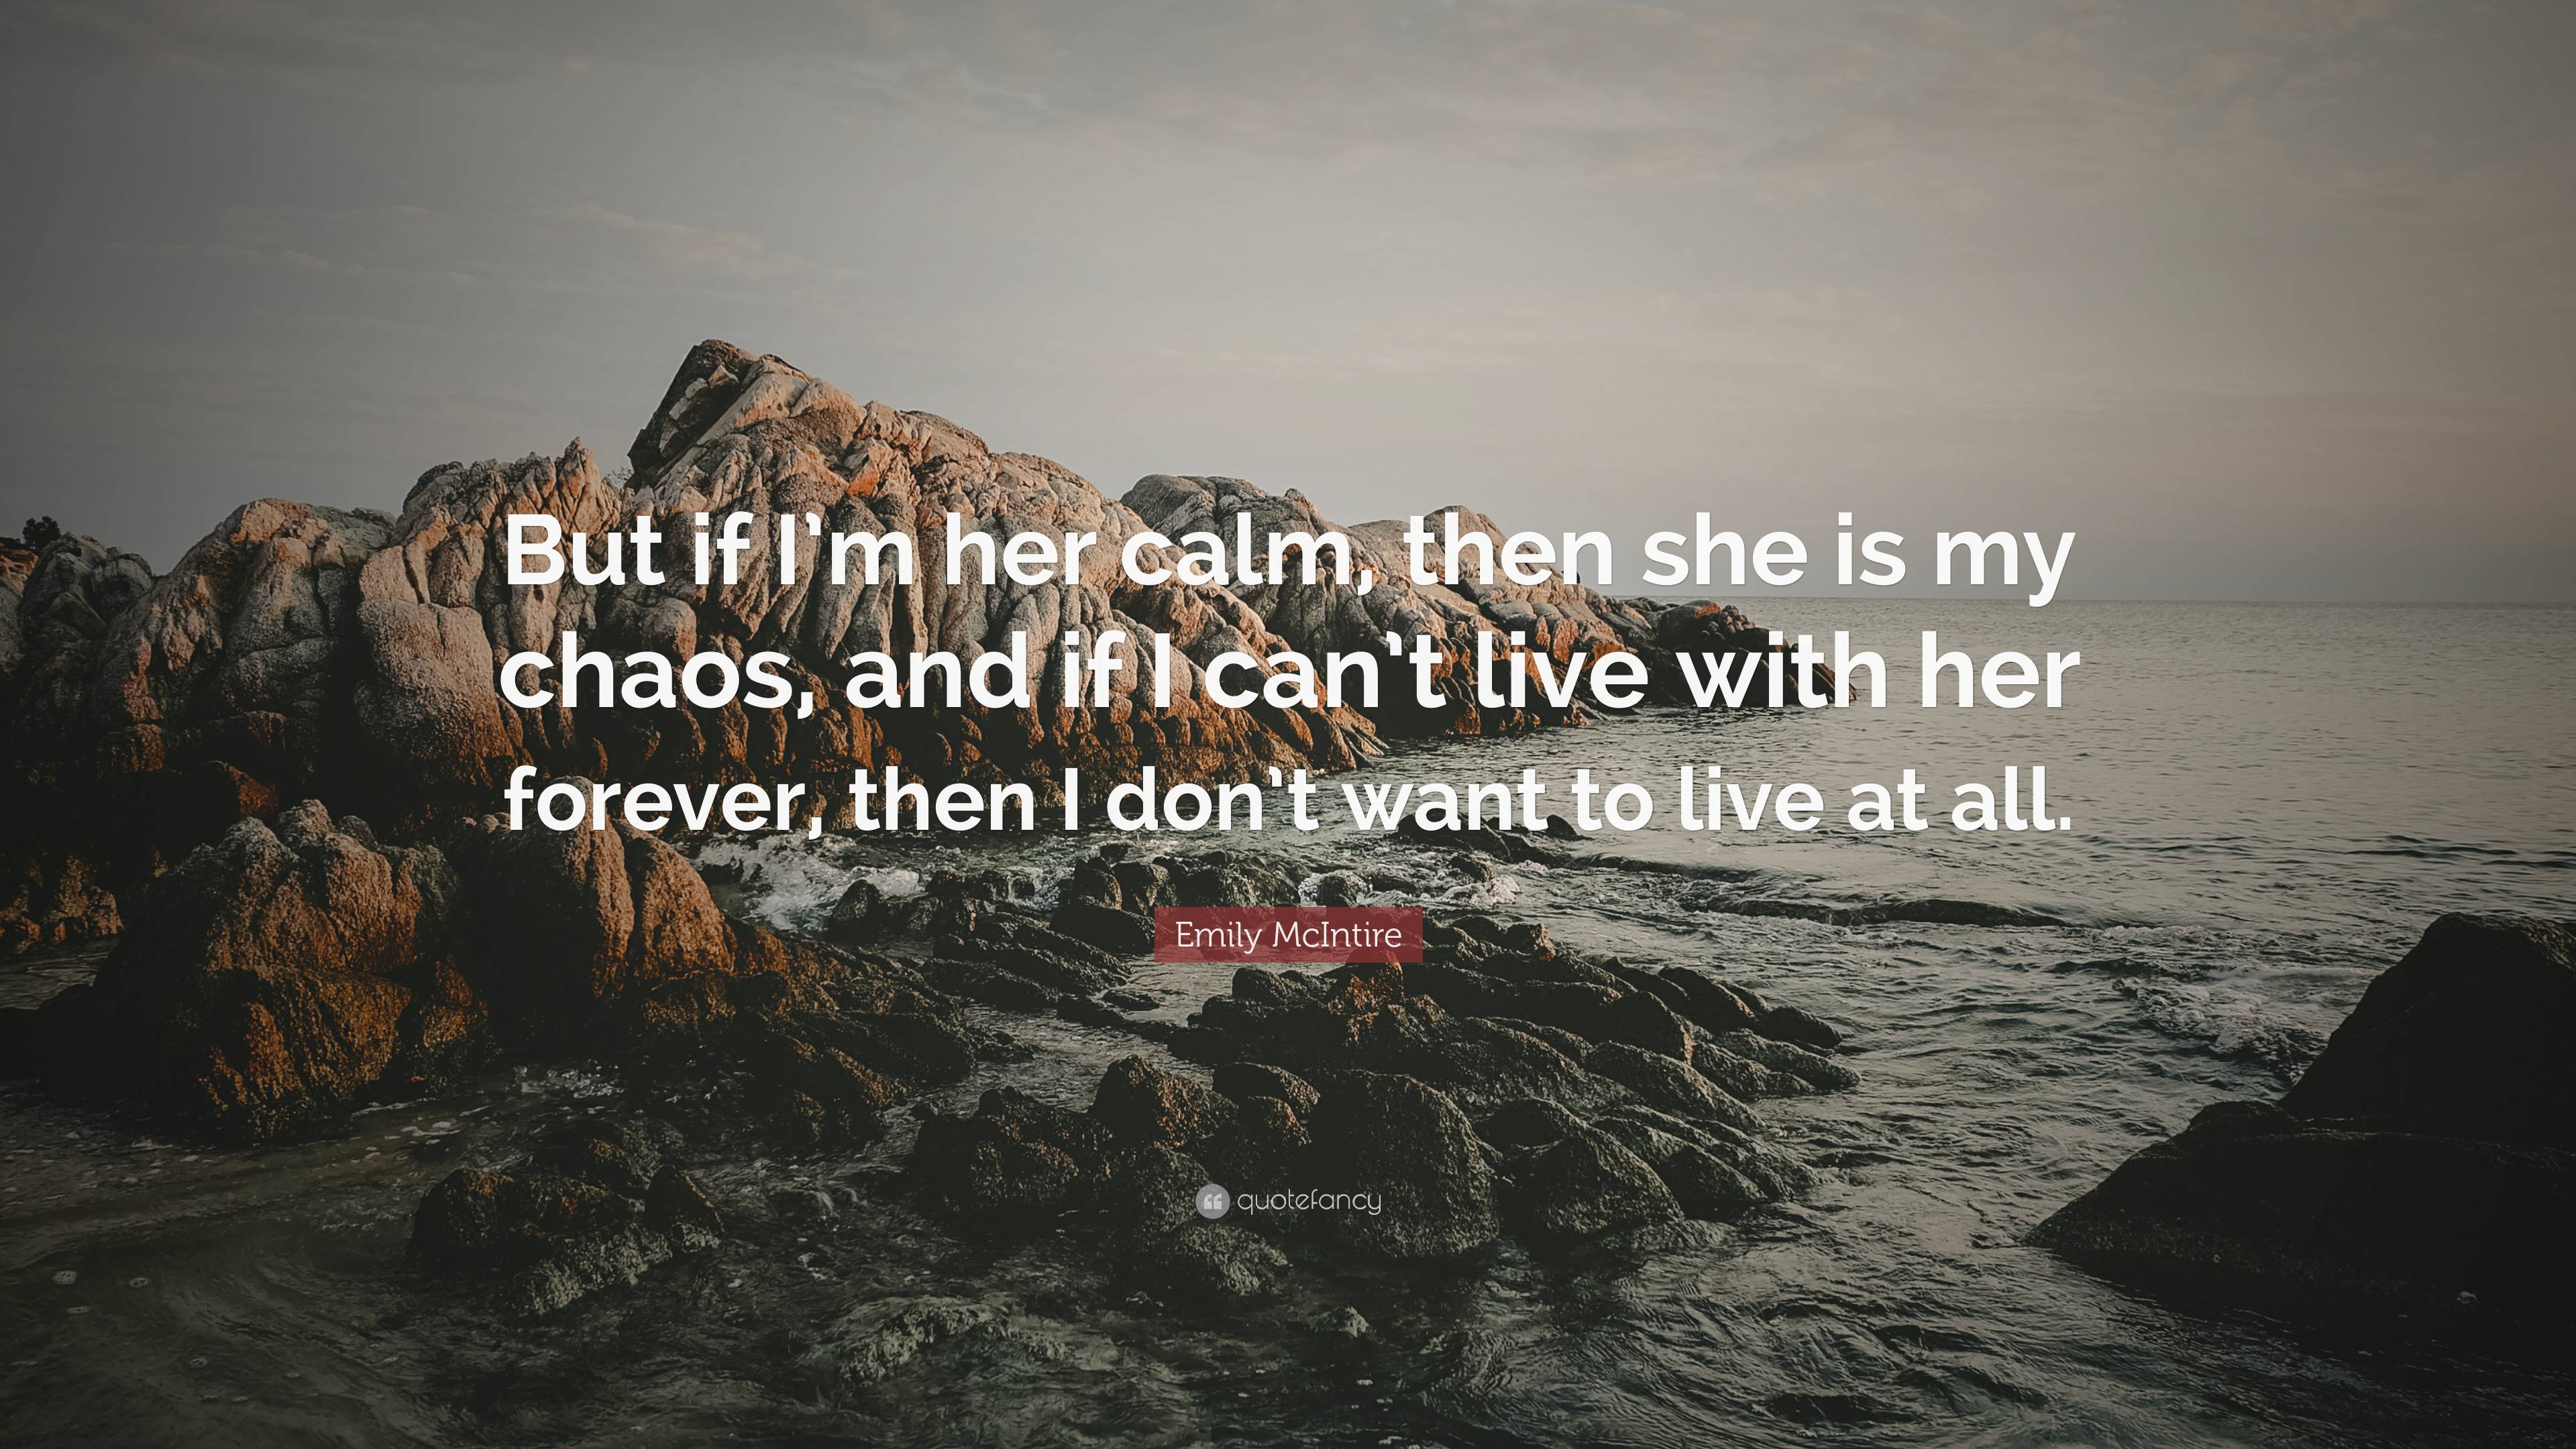 Emily McIntire Quote: “But if I’m her calm, then she is my chaos, and ...